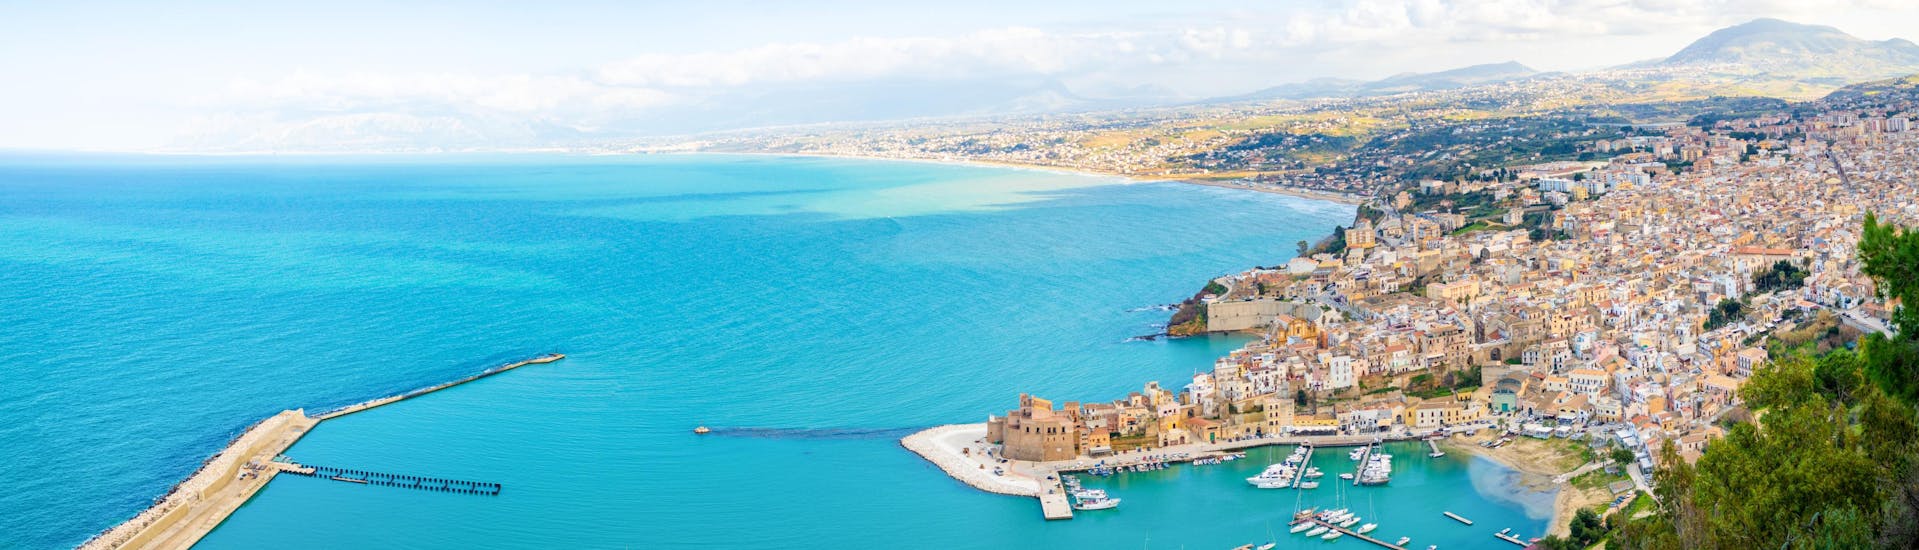 Aerial view of Castellammare del Golfo, a popular departure point for boat trips in Sicily.